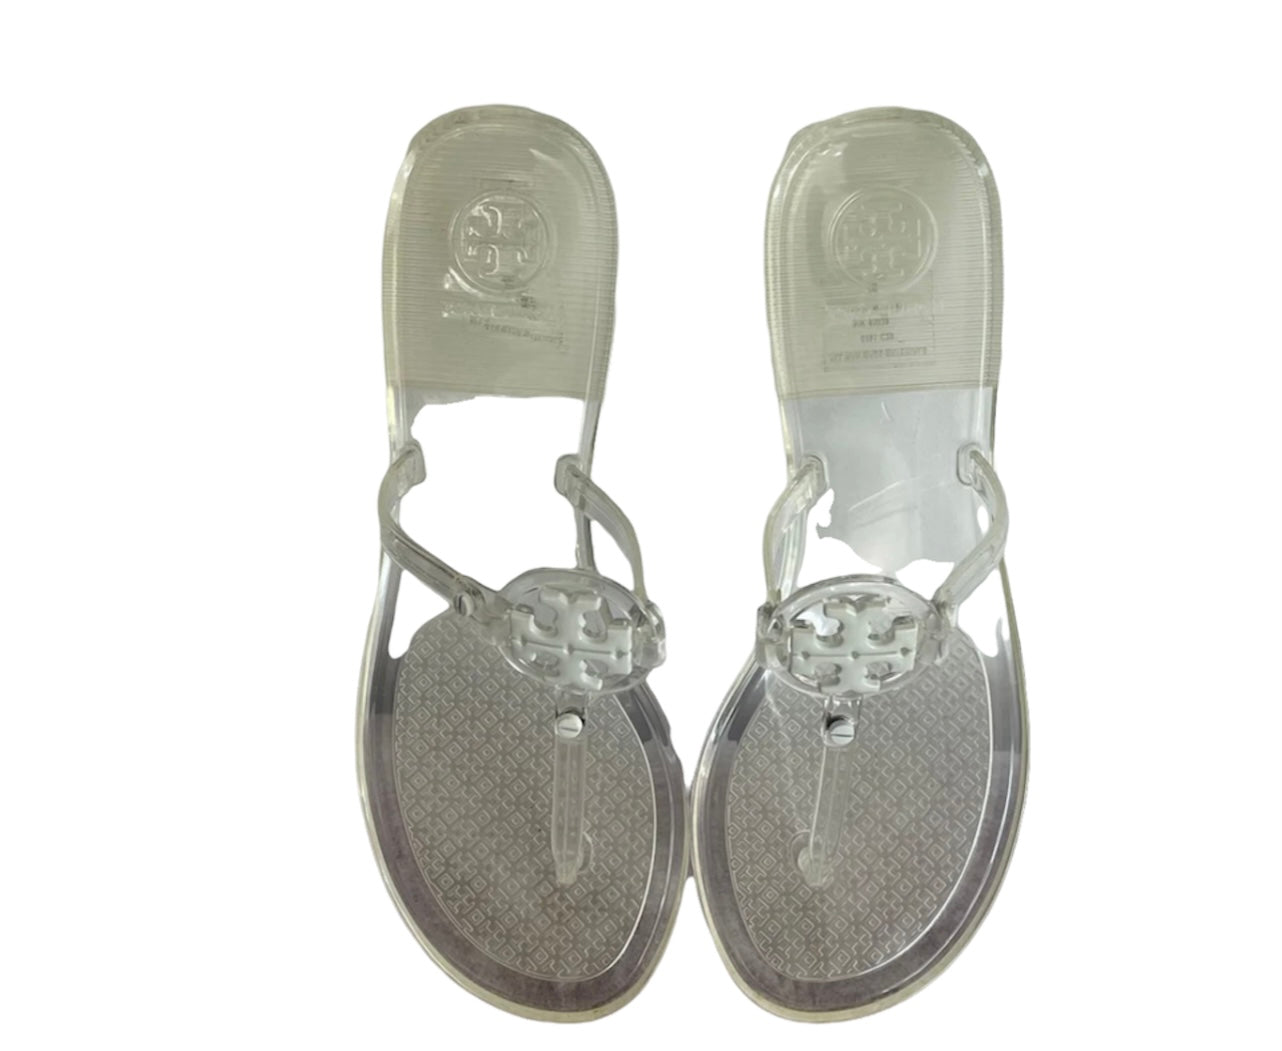 Tory Burch Mini Miller Flat Thong Sandals – Midtown Authentic Wyckoff